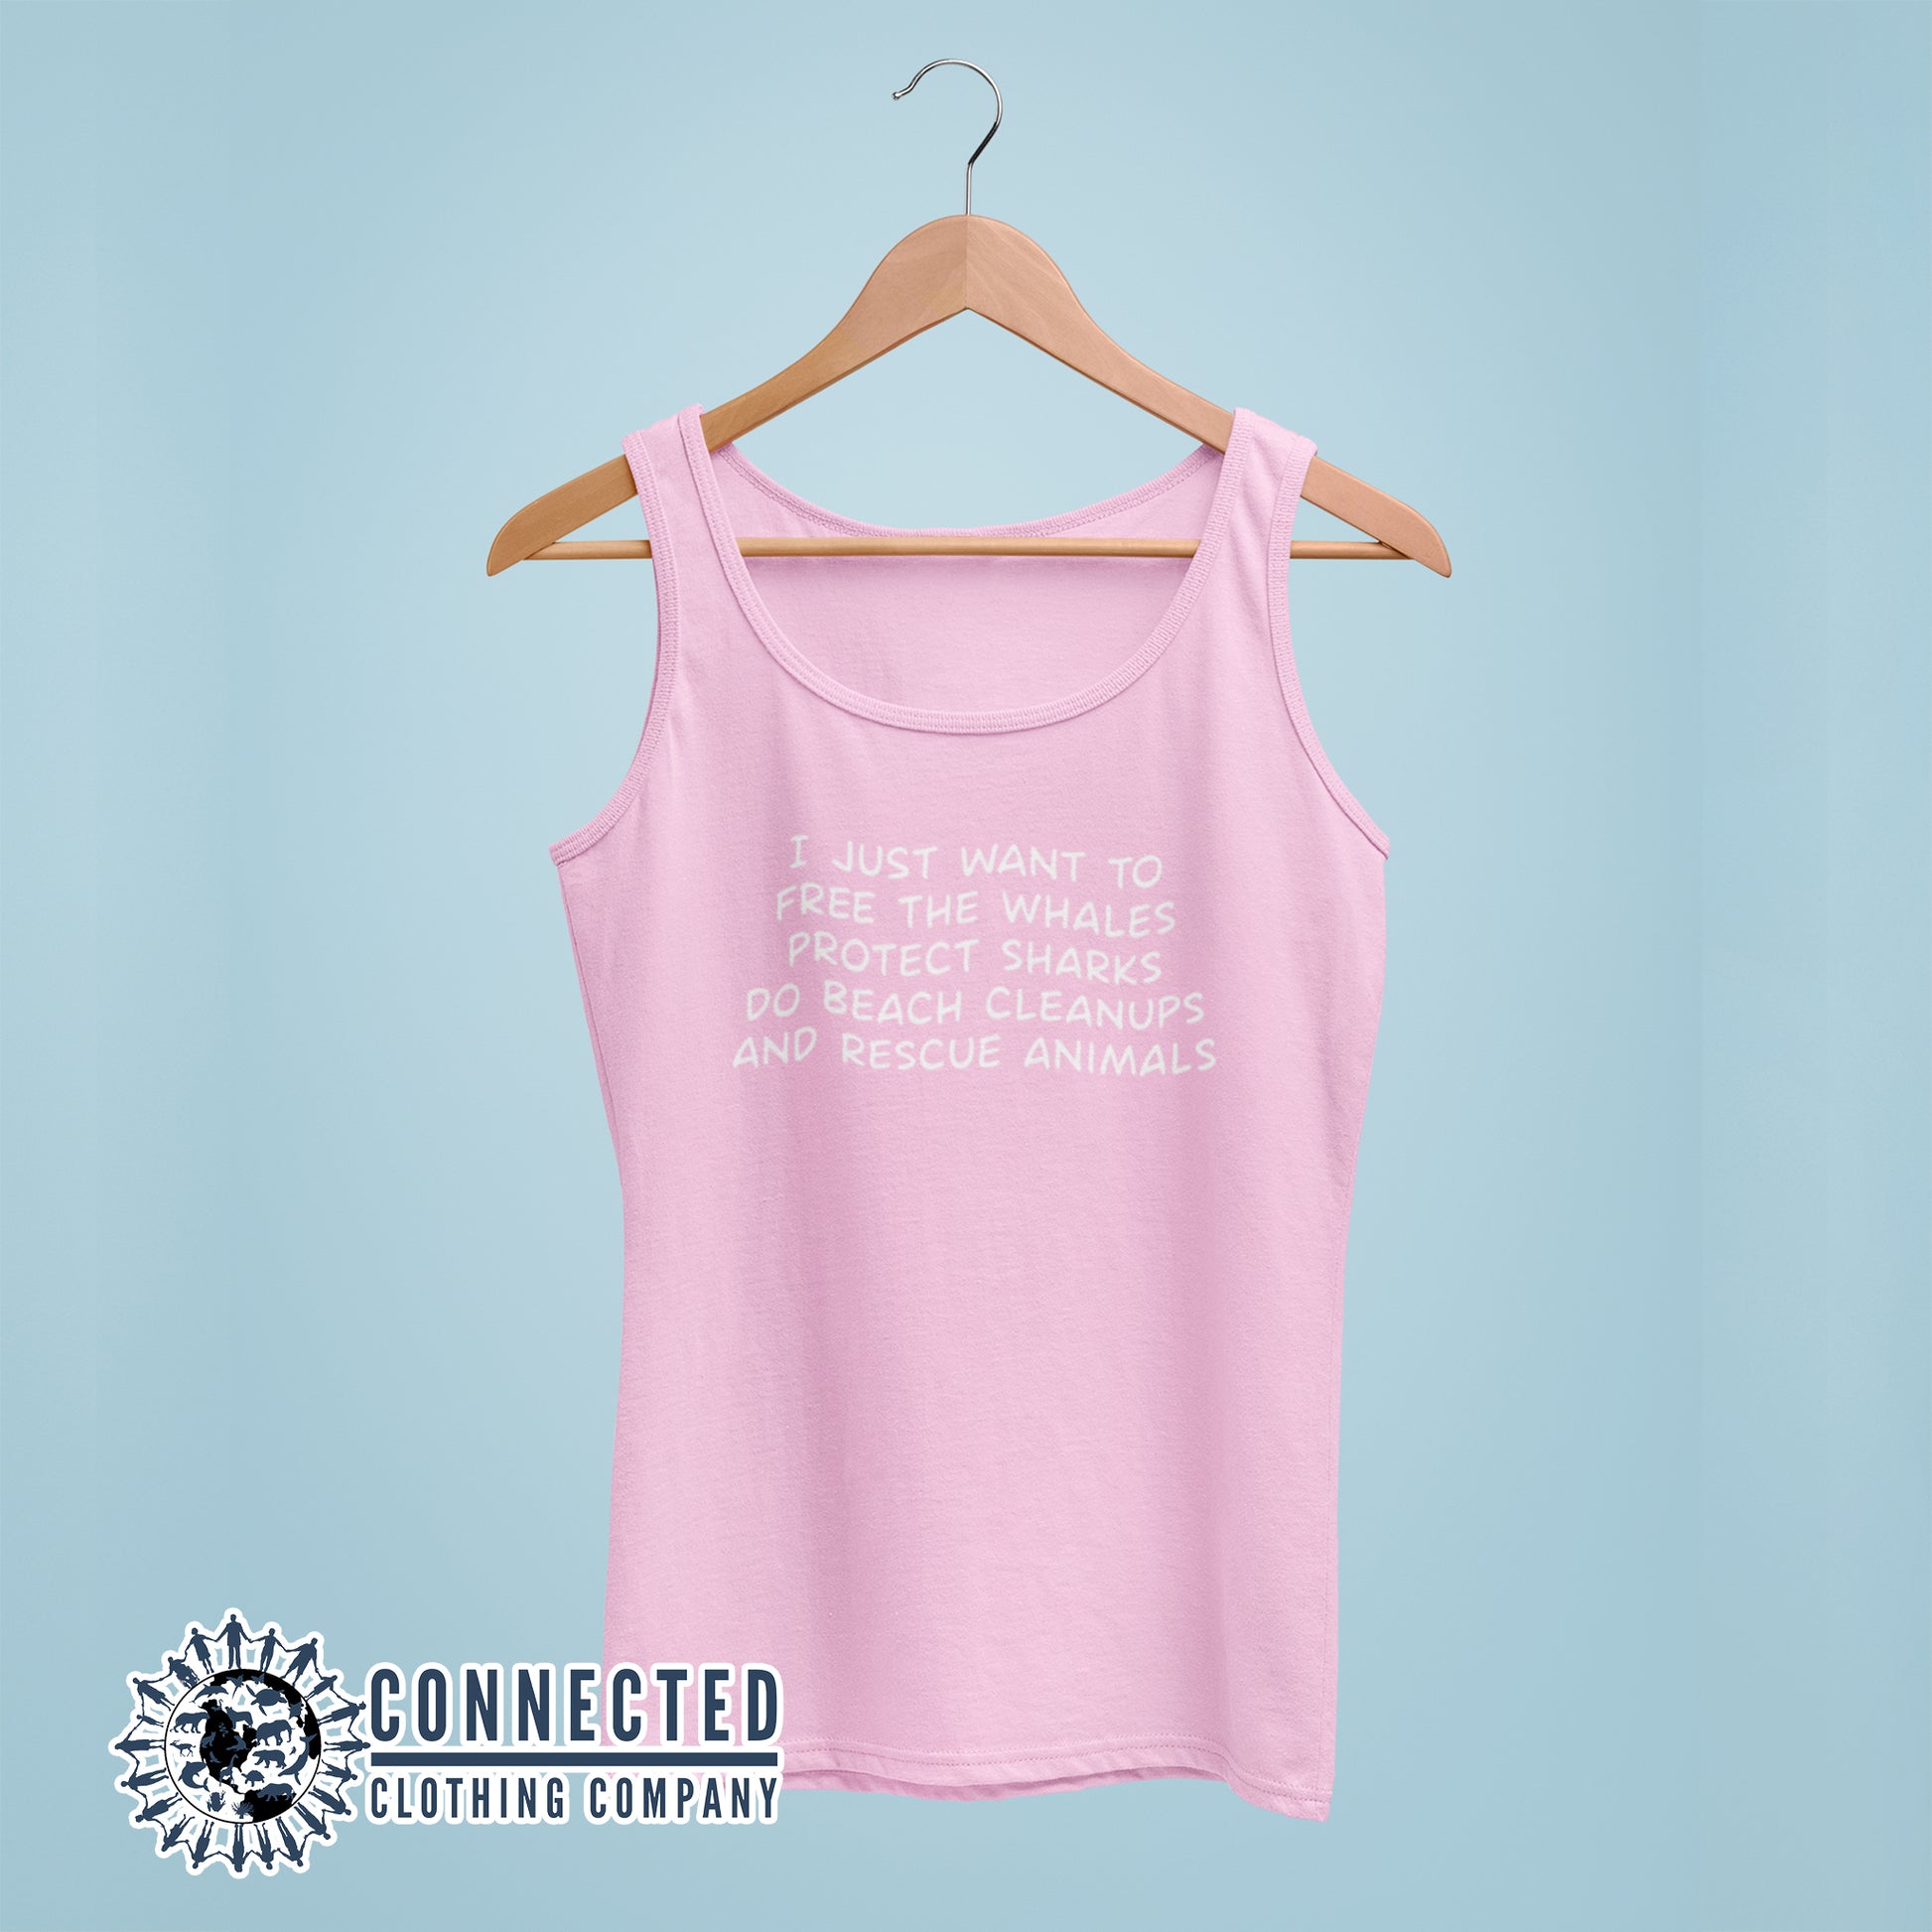 Pink I Just Want To Save The World Women's Tank Top reads "I just want to free the whales, protect sharks, do beach cleanups, and rescue animals" - Connected Clothing Company - 10% of profits donated to Mission Blue ocean conservation